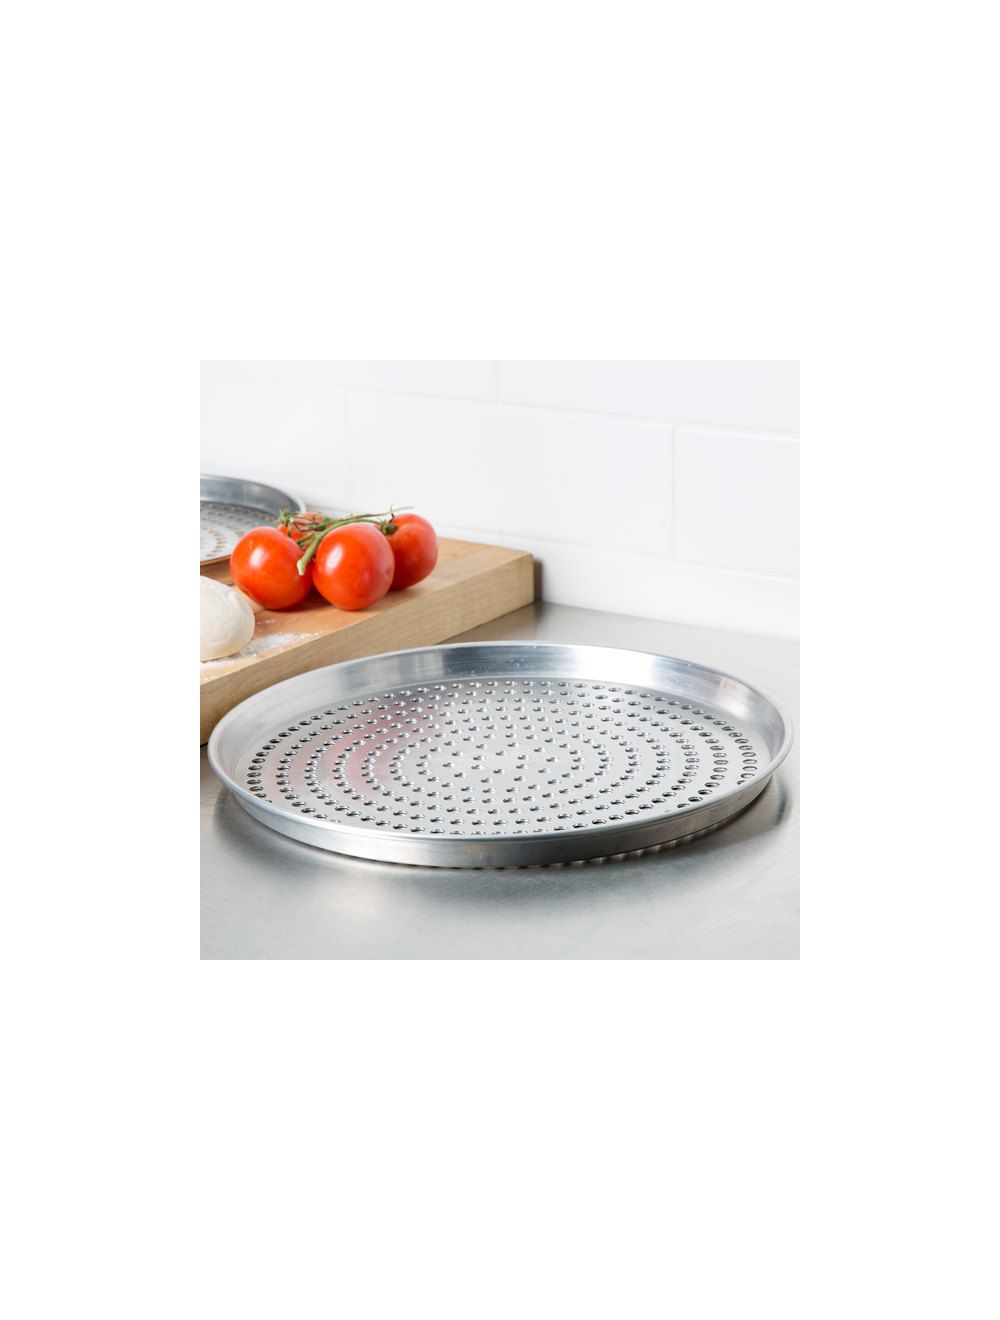 Super Perforated Heavy Weight Aluminum Tapered / Nesting Pizza Pan